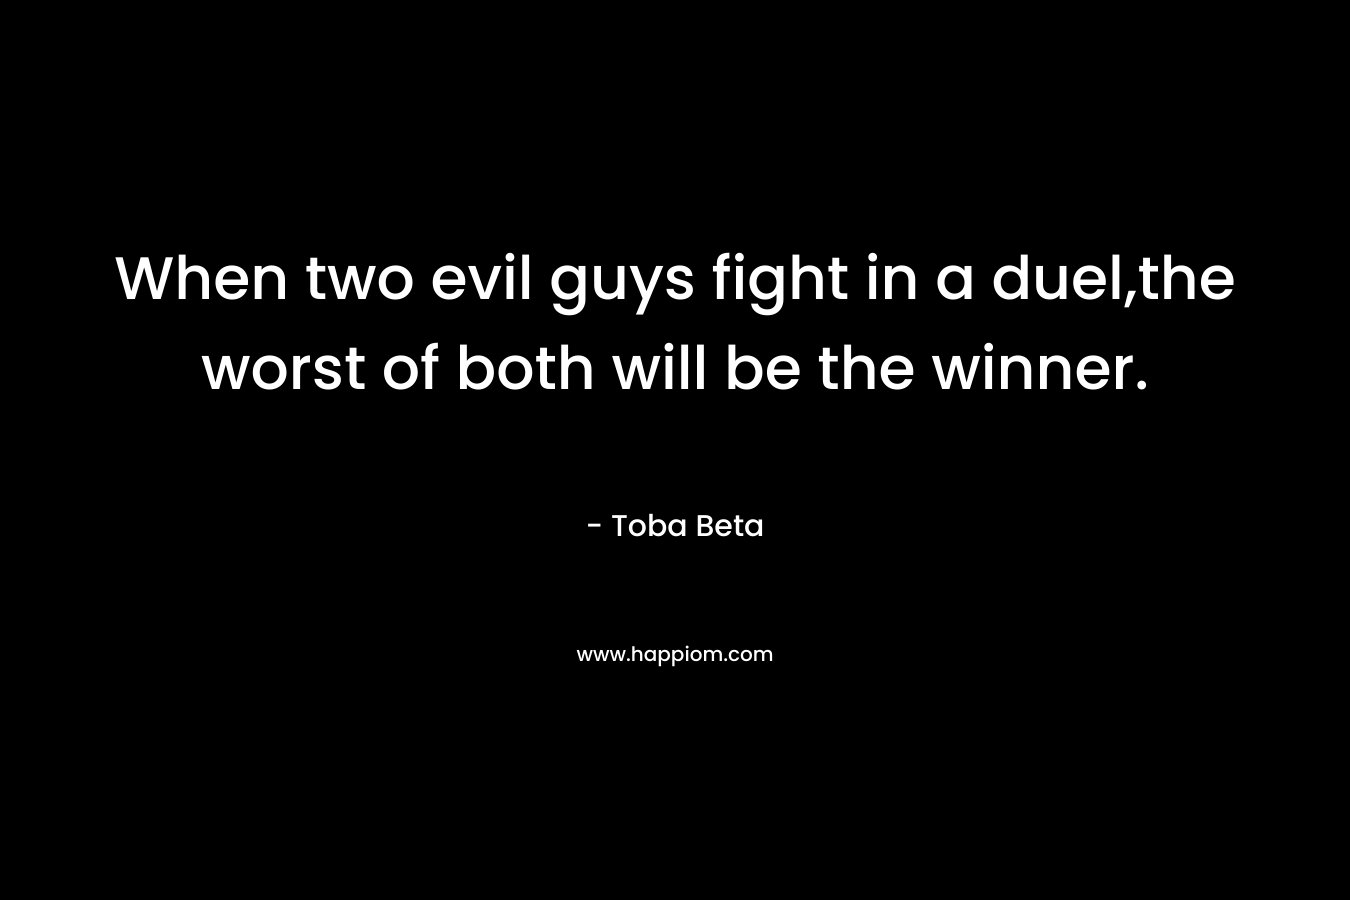 When two evil guys fight in a duel,the worst of both will be the winner.